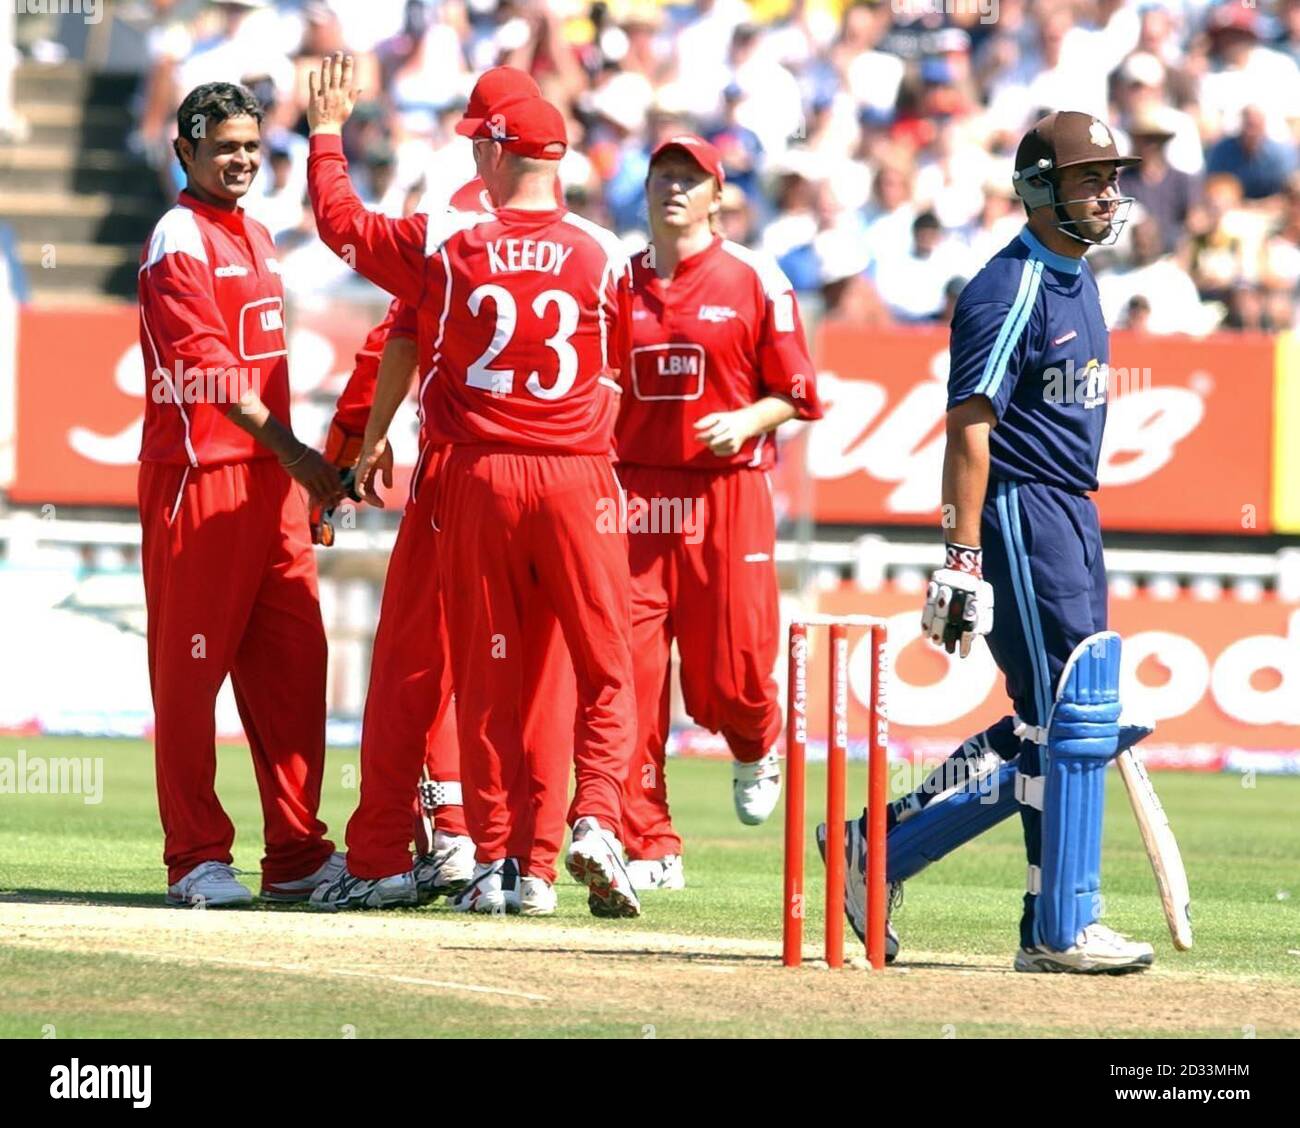 Lancashire Lightning players celebrate after Surrey Lion's Adam Hollioake was caught by Warren Hegg off the bowling of Mongia for 1 run during their Twenty20 Cup semi-final at Edgbaston. Stock Photo